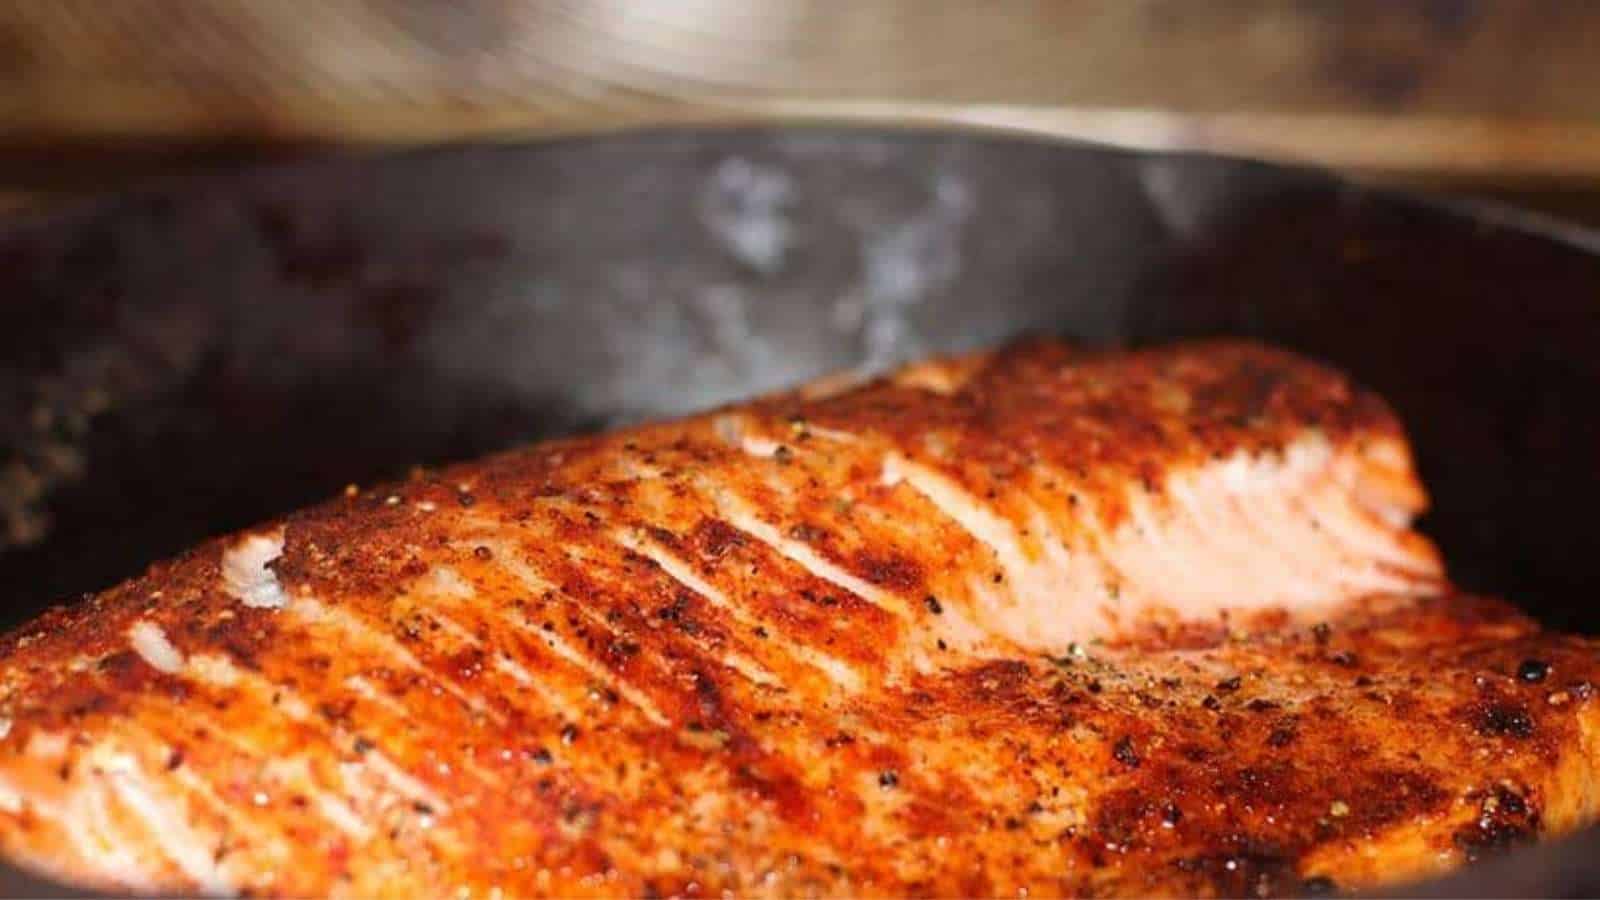 A piece of salmon is being cooked in a skillet.